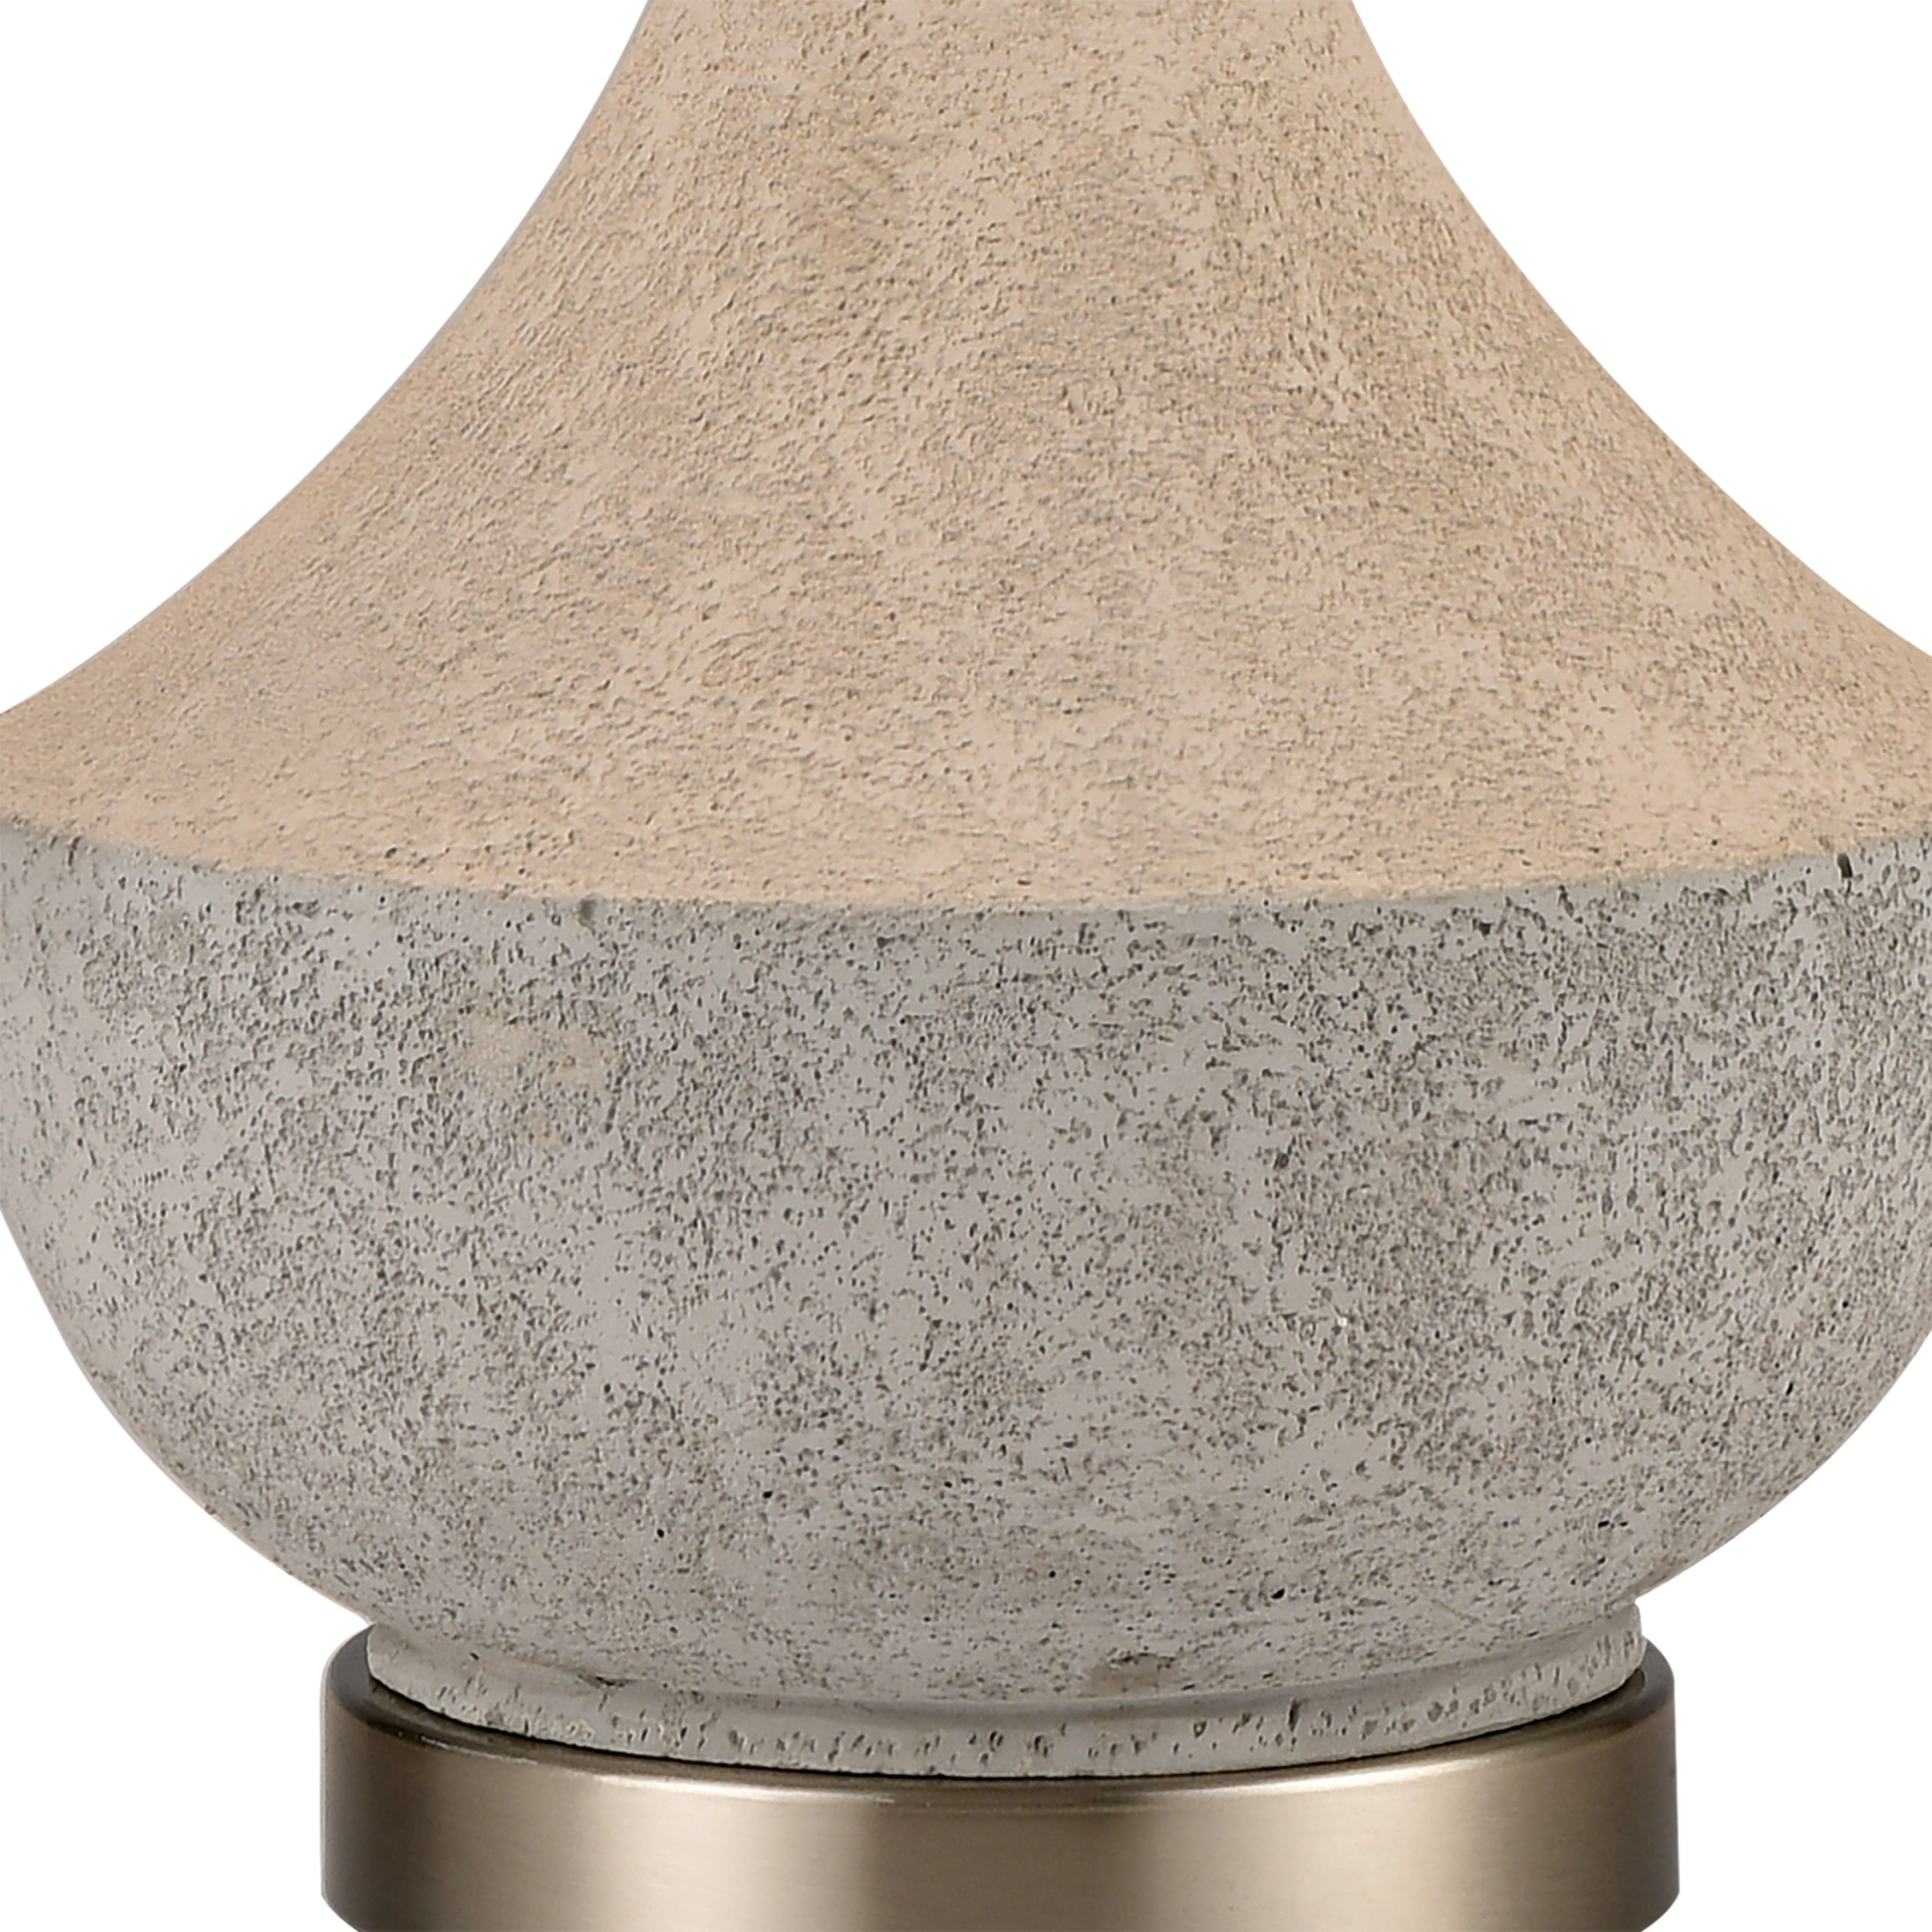 Wendover 25" High 1-Light Table Lamp